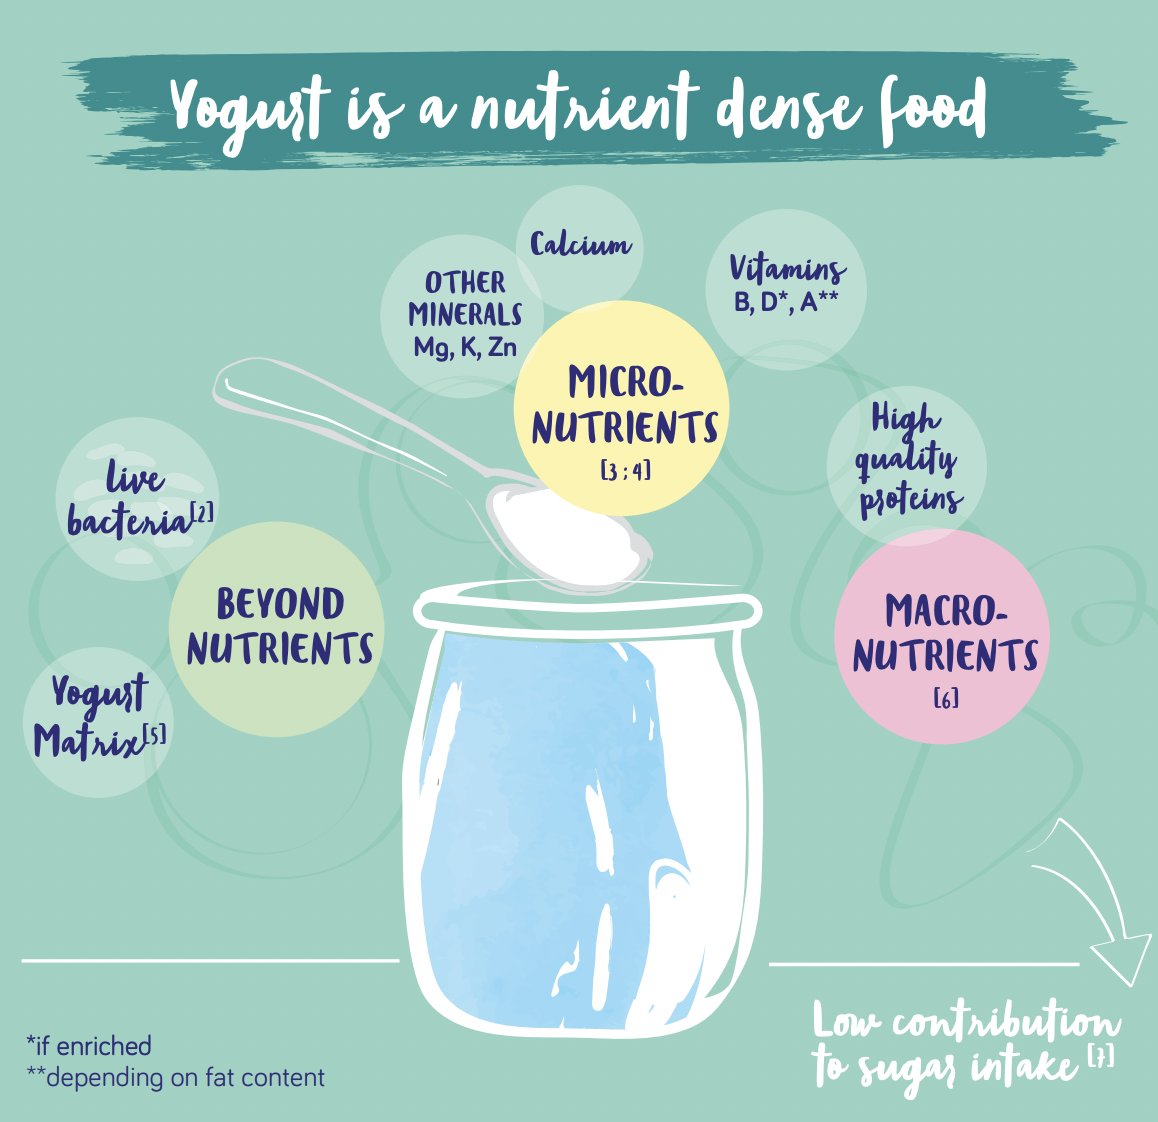 #yogurt has interesting assets to address malnutrition through its nutrient-density, fermentation properties, effects on NCD. Then, it should be included in #sustainablediets, right?